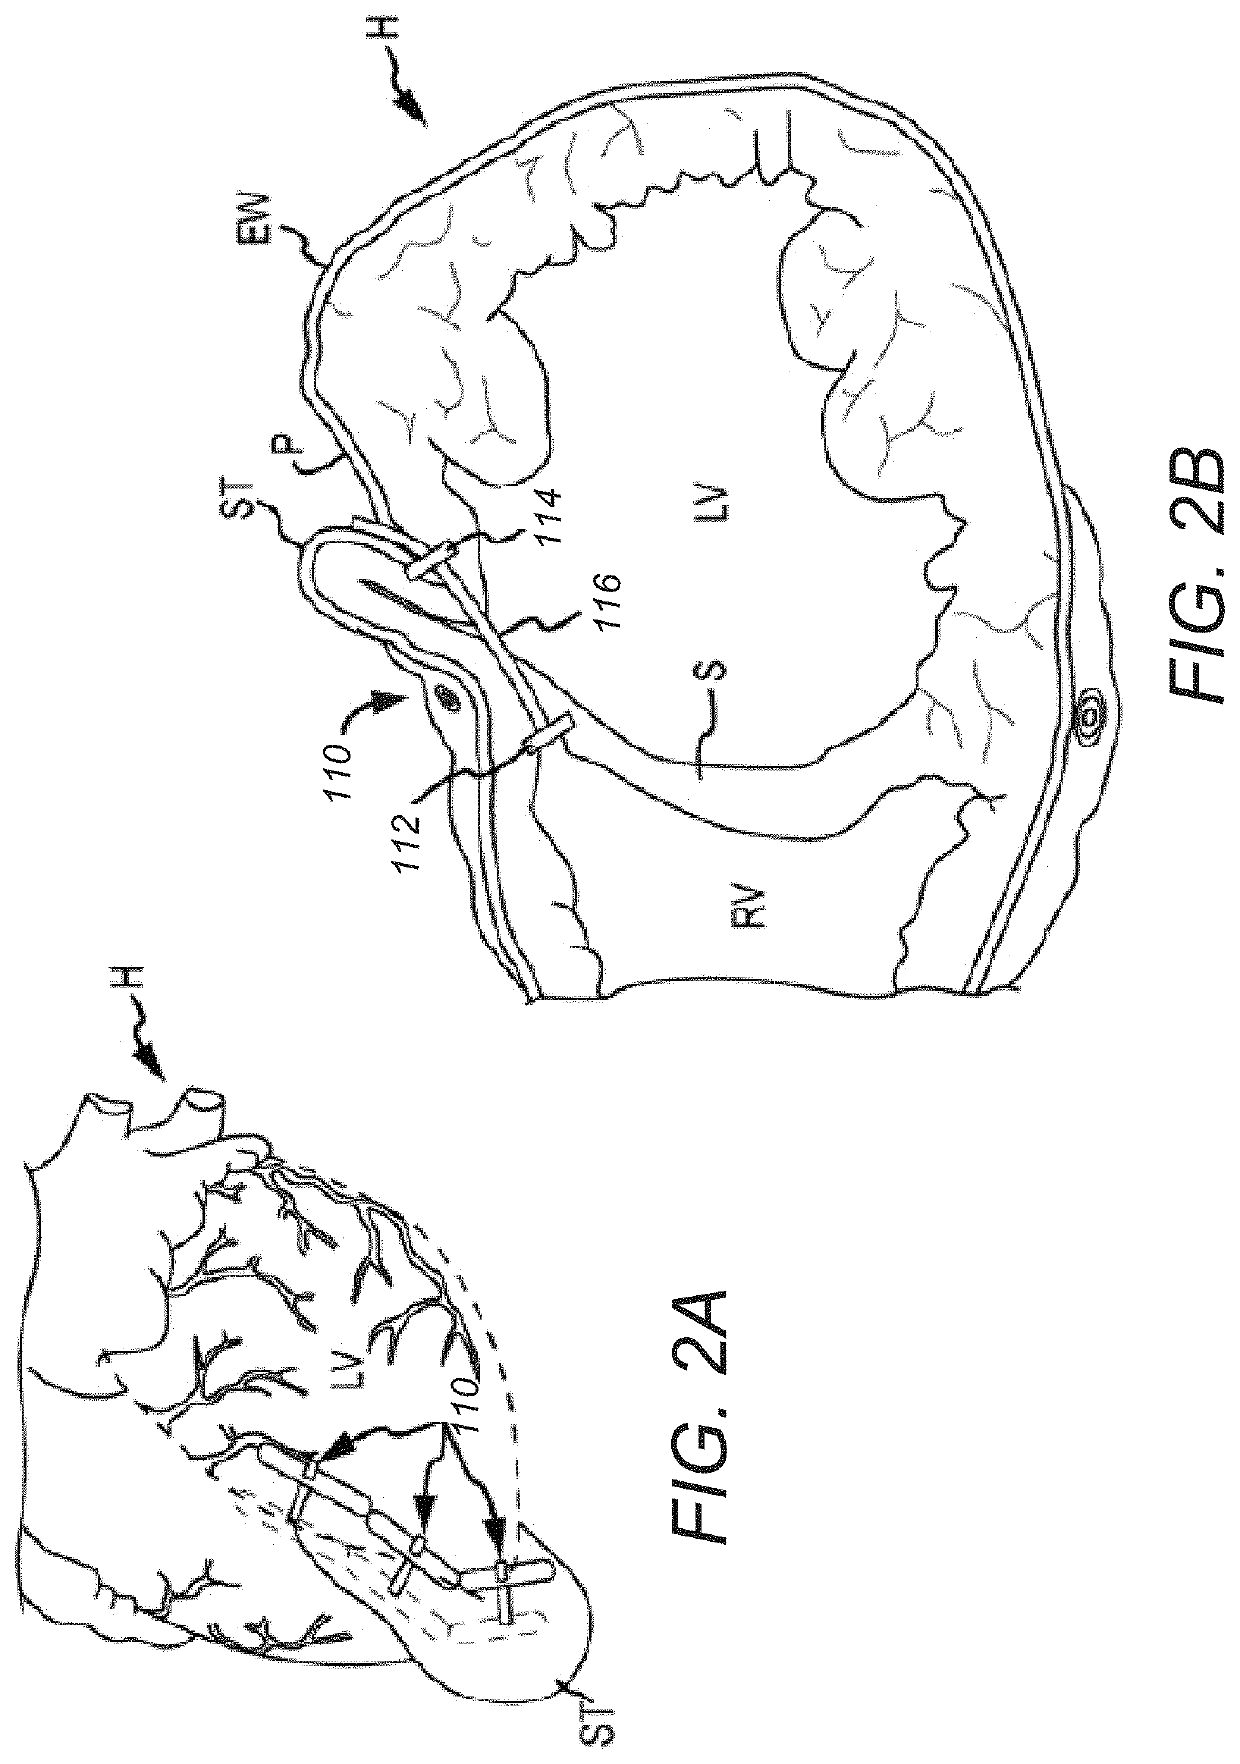 Tissue protecting devices for treatment of congestive heart failure and other conditions